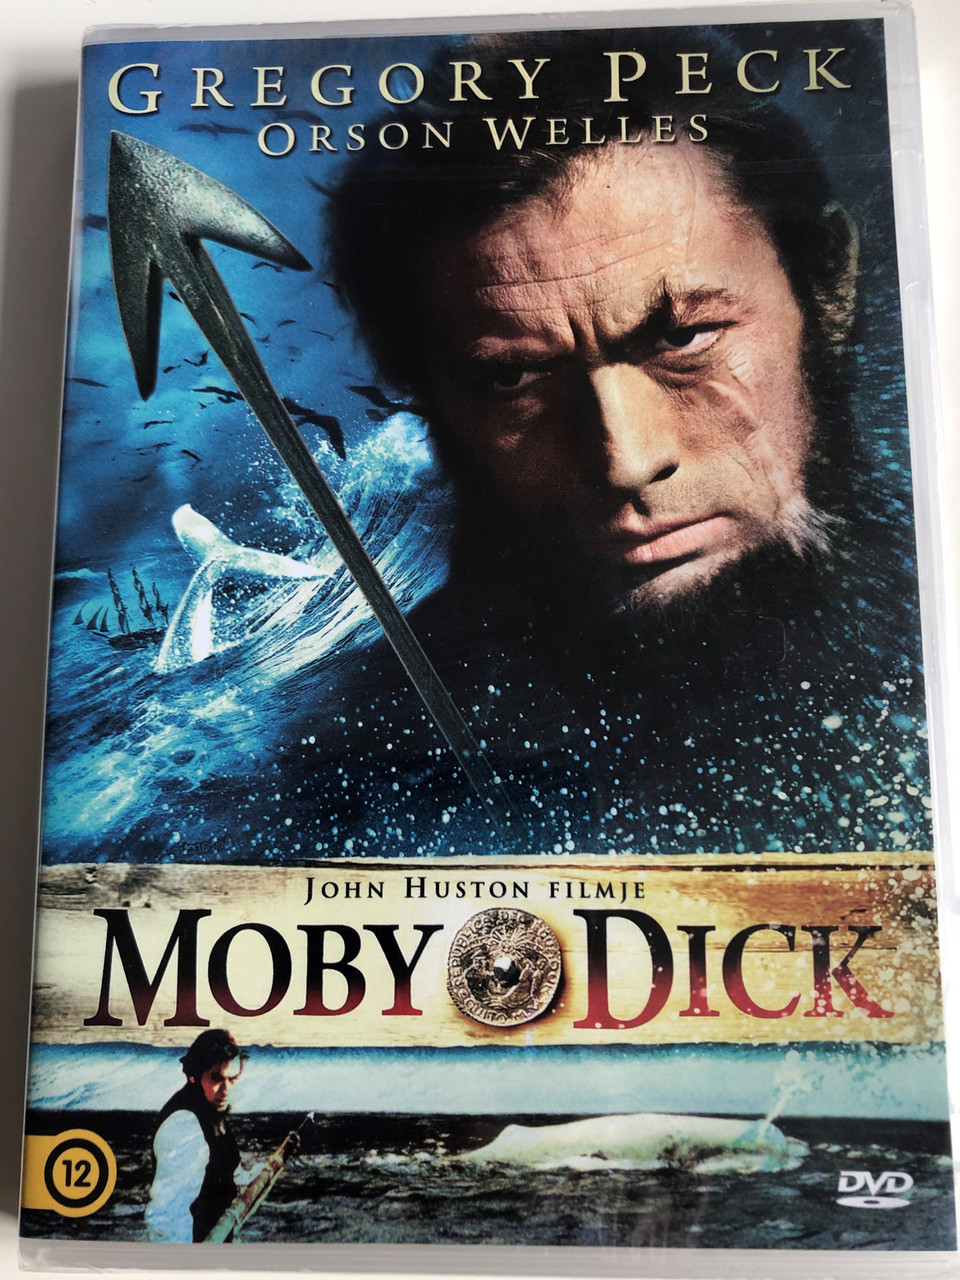 Moby Dick DVD 1956 / Directed by John Houston / Starring: Gregory Peck,  Richard Basehart, Leo Genn, Orson Welles / Film adaptation of literary  classic by Herman Melville - bibleinmylanguage